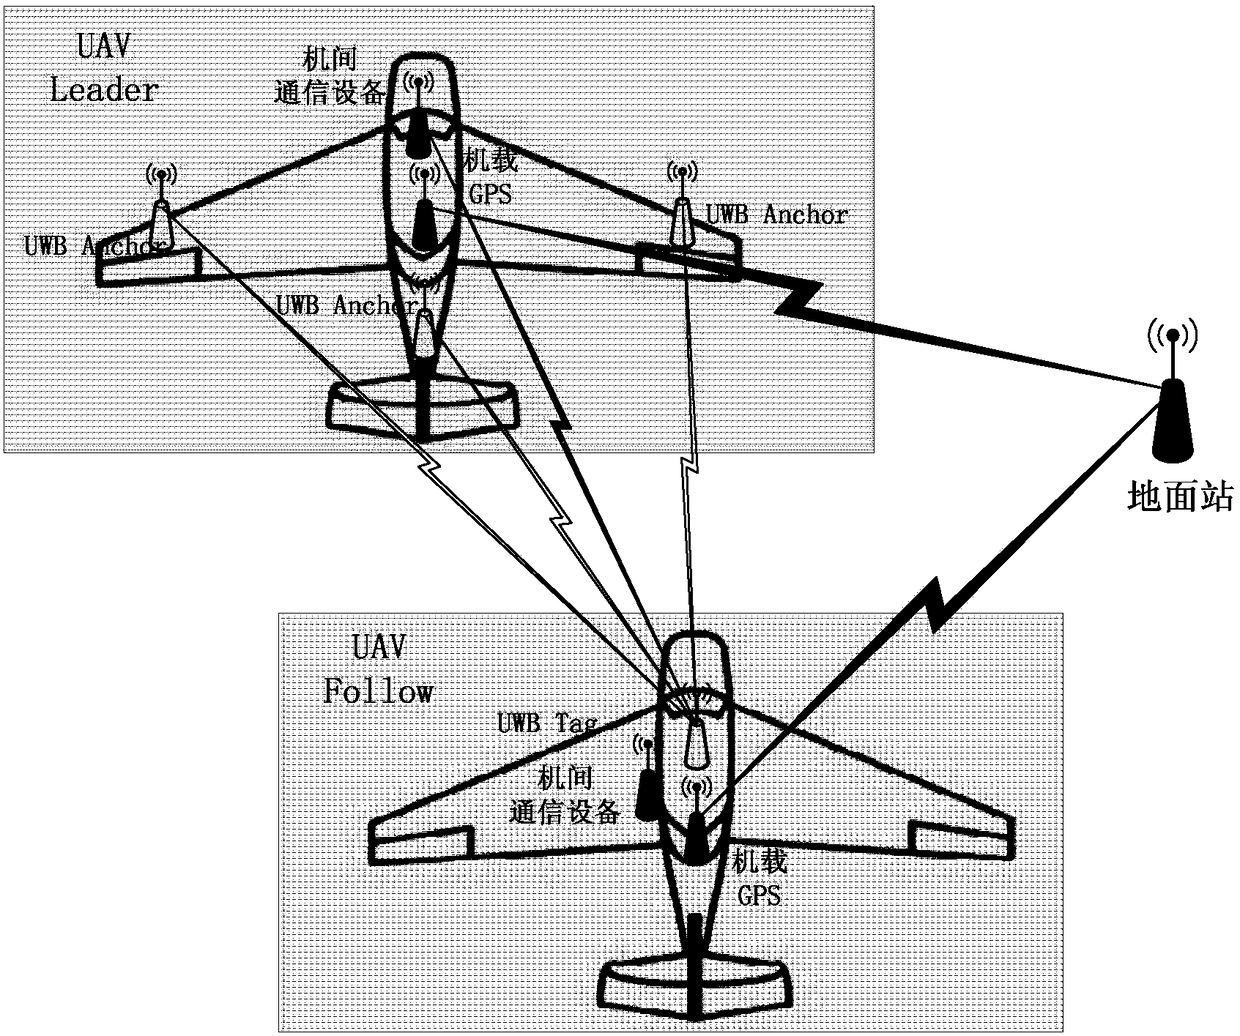 UWB (Ultra-wide Bandwidth)-based communication and positioning method and integrated system for multi-uavs close formation flight